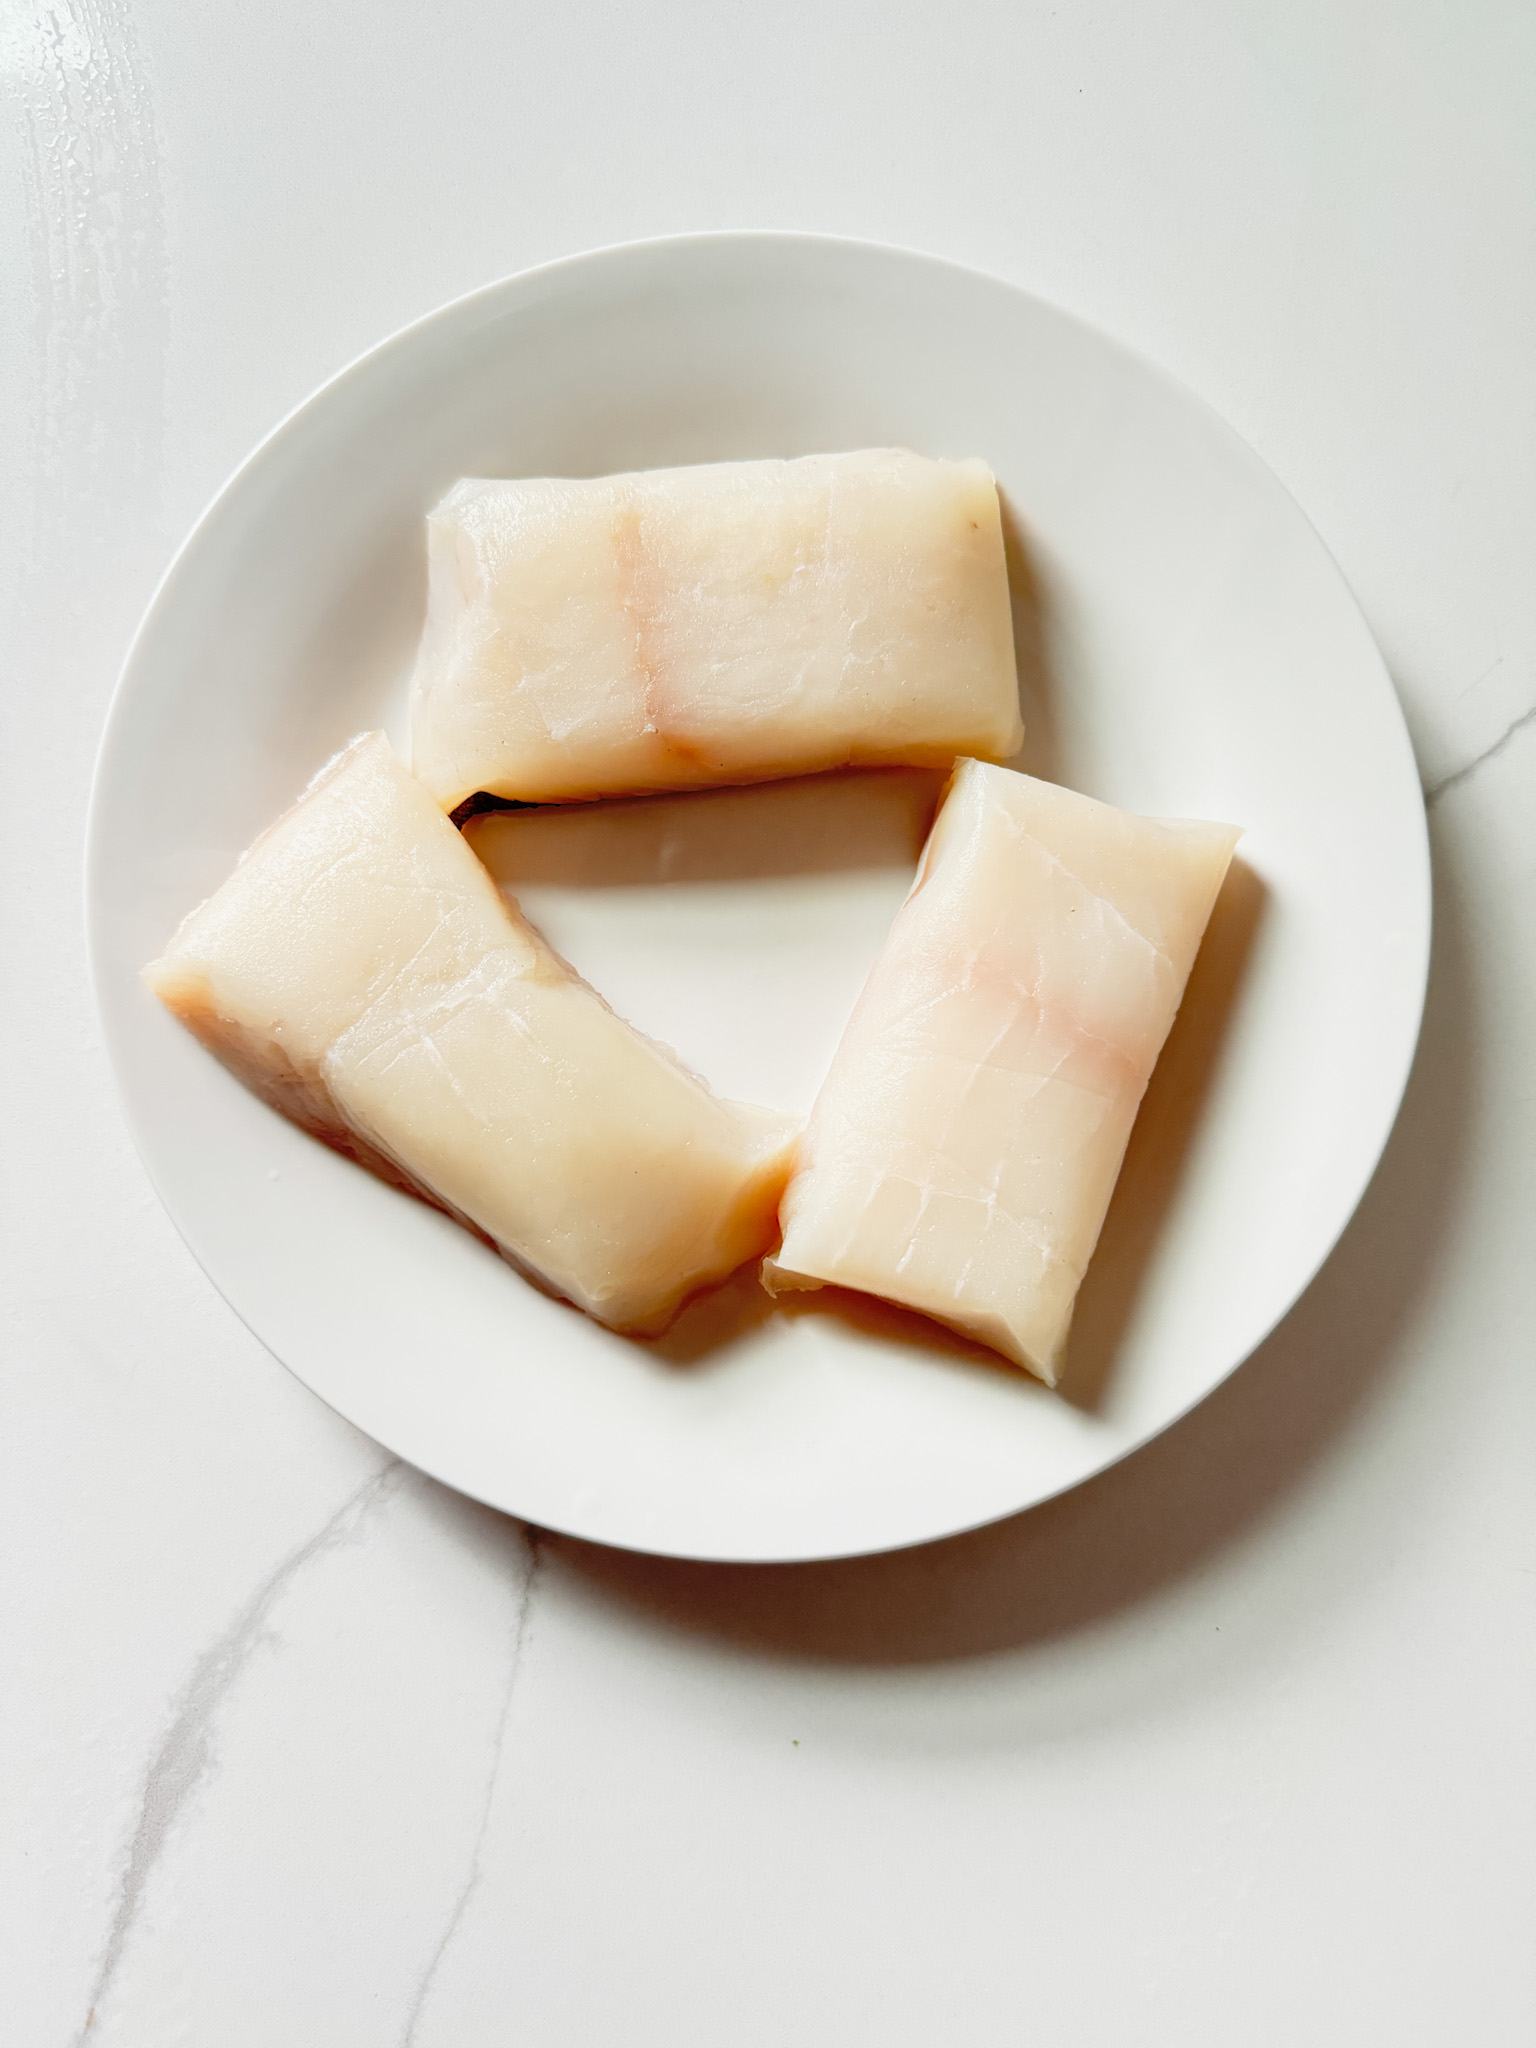 3 pieces of halibut on a white plate, uncooked